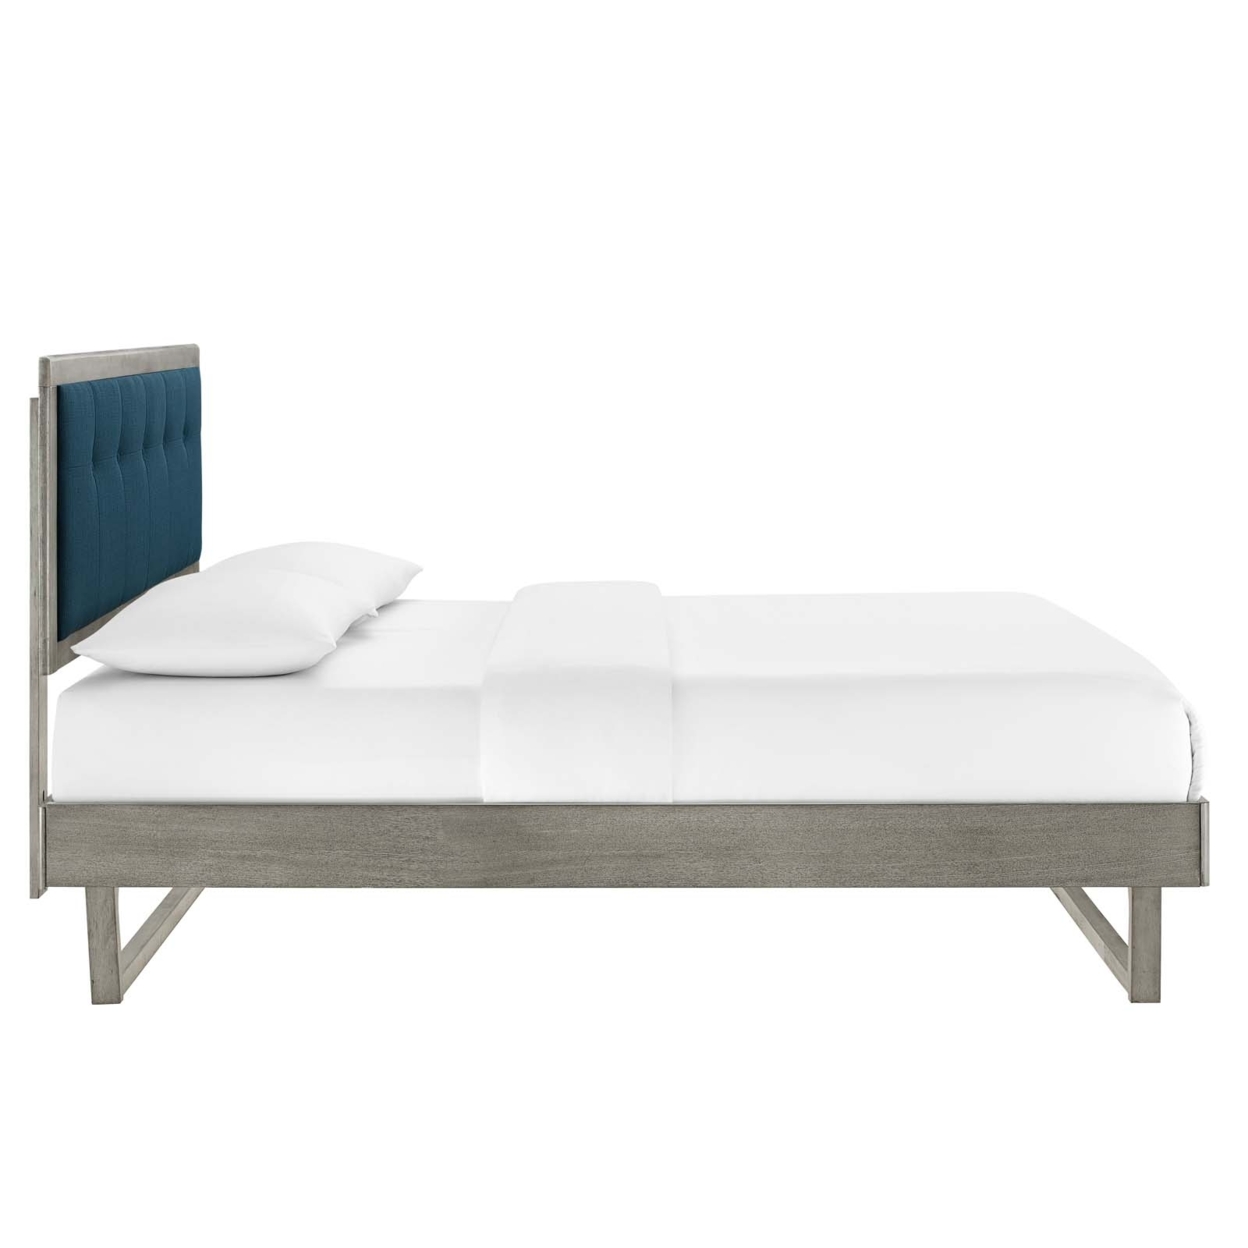 Willow King Wood Platform Bed With Angular Frame, Gray Azure